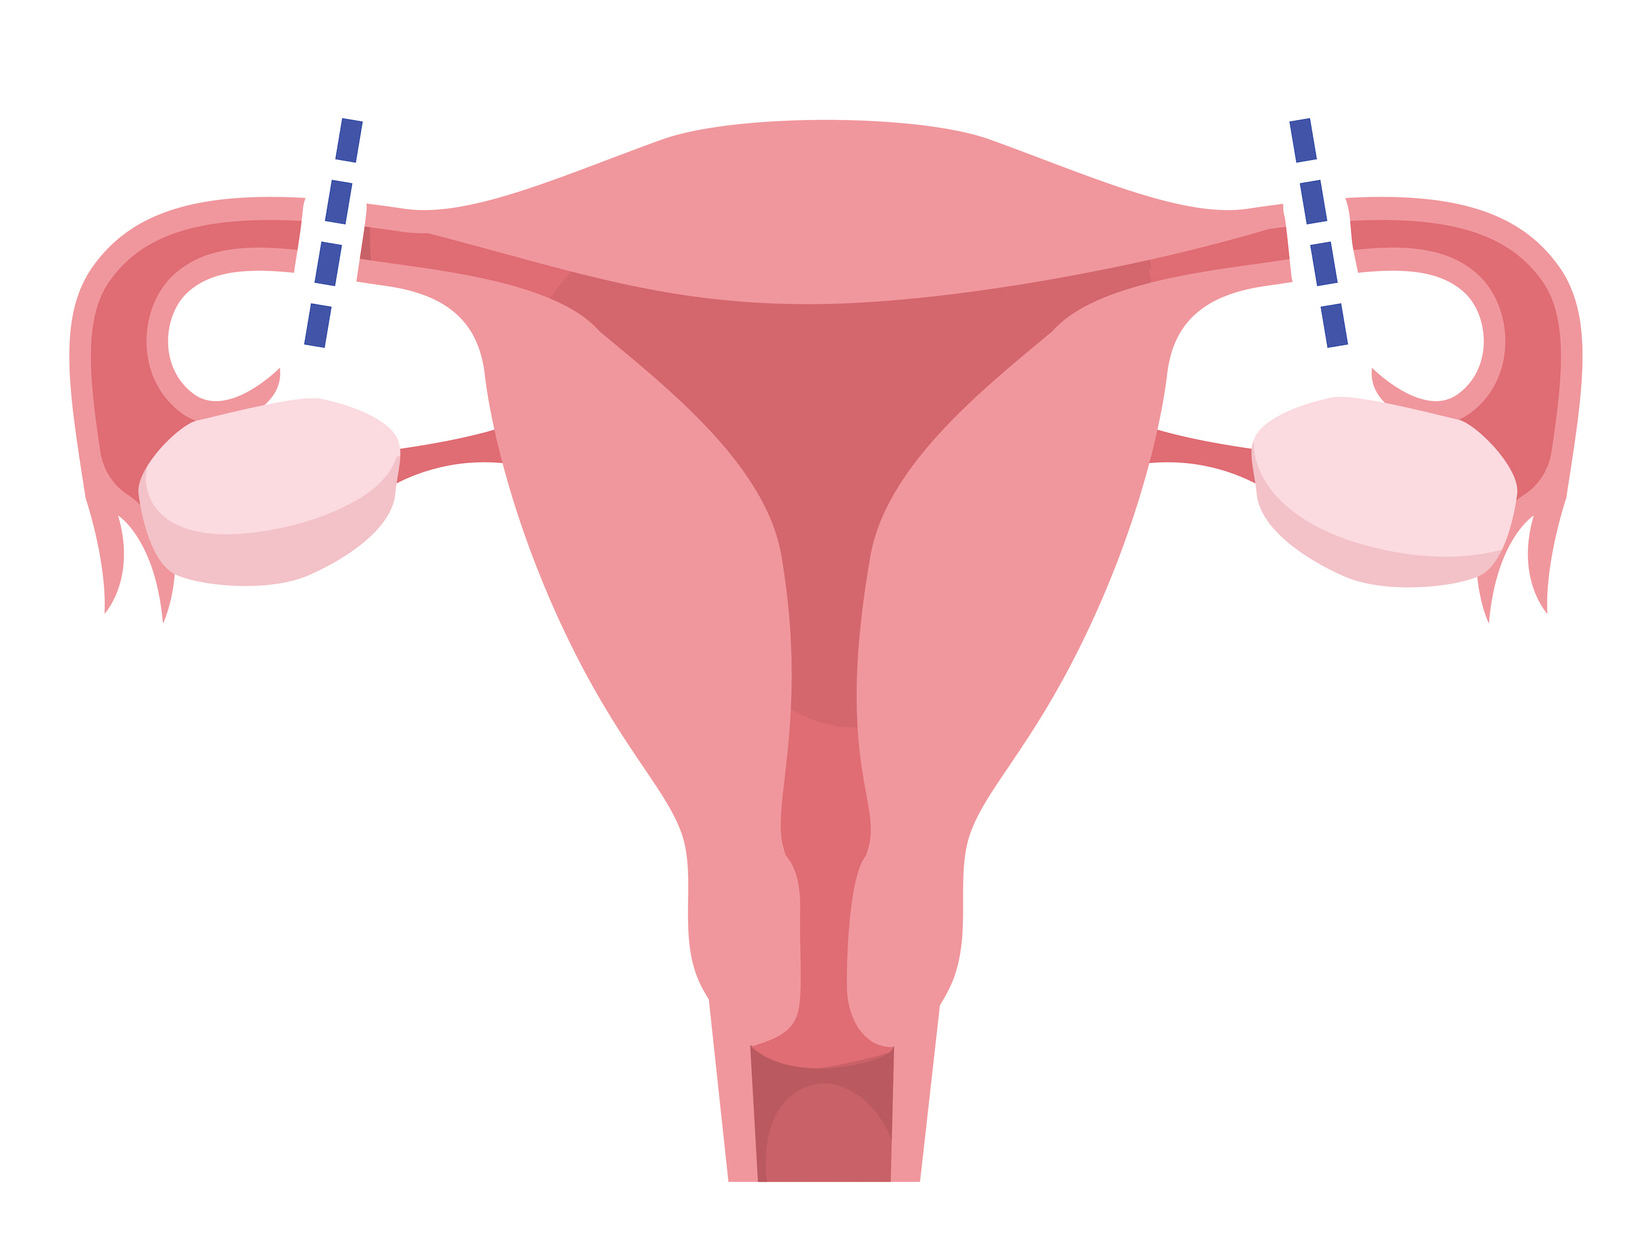 A uterus showing fallopian tubes which are cut and tied.